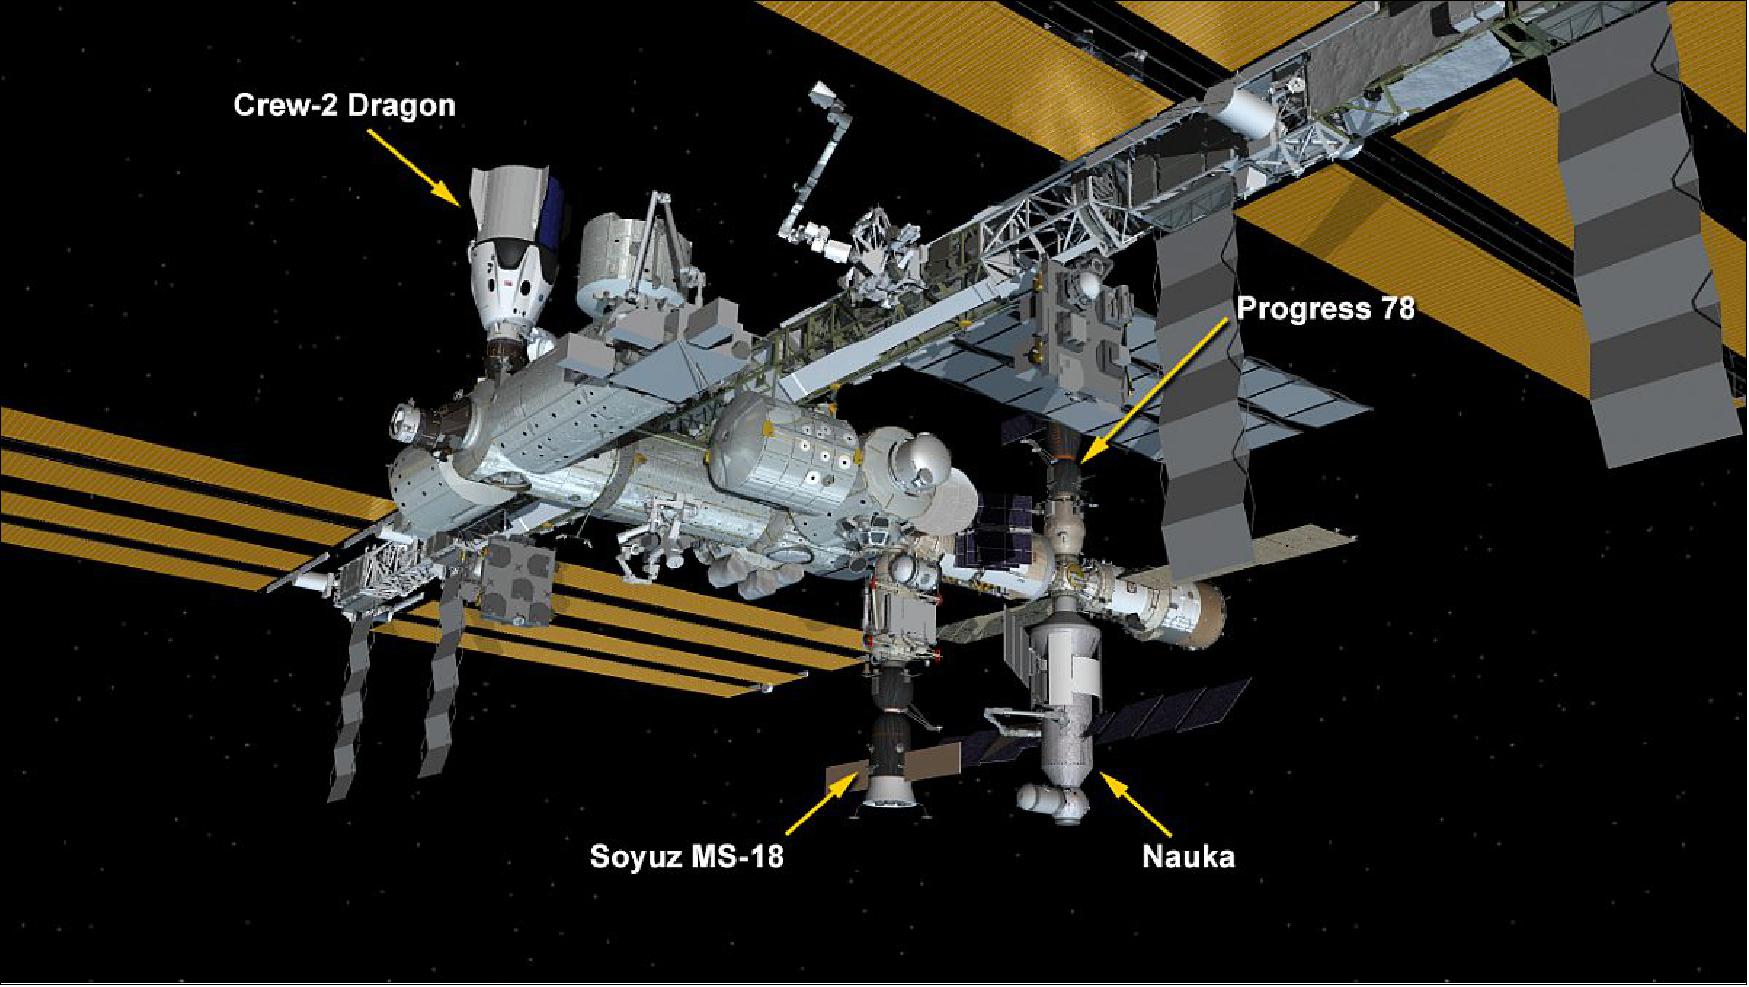 Figure 11: July 29, 2021: International Space Station Configuration. Three spaceships are docked at the space station including the SpaceX Crew Dragon and Russia's Soyuz MS-18 crew ship and ISS Progress 78 resupply ship. The new Nauka Multipurpose Logistics Module (MLM) is now attached to the Zvezda service module's Earth-facing port (image credit: NASA TV)